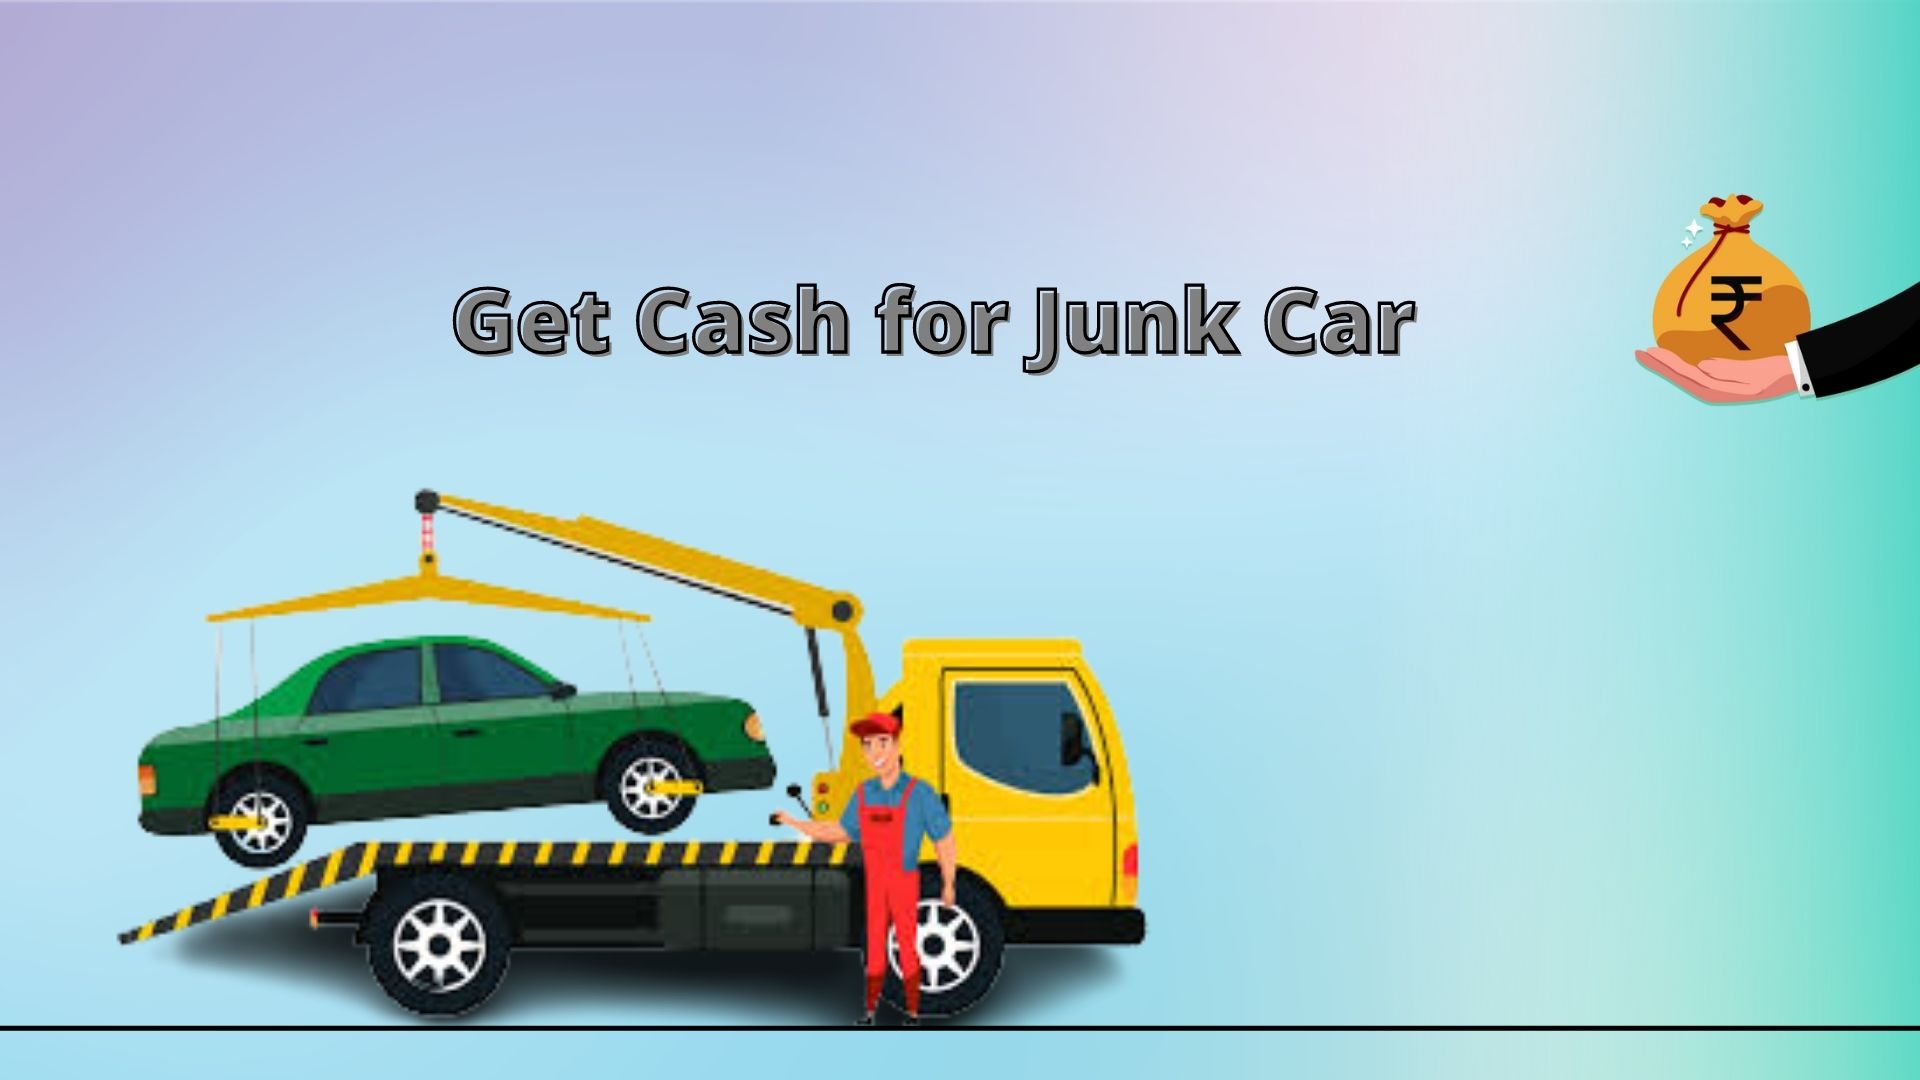 3 Reasons to Sell your Junk Car and Consider Getting Cash for Junk Car